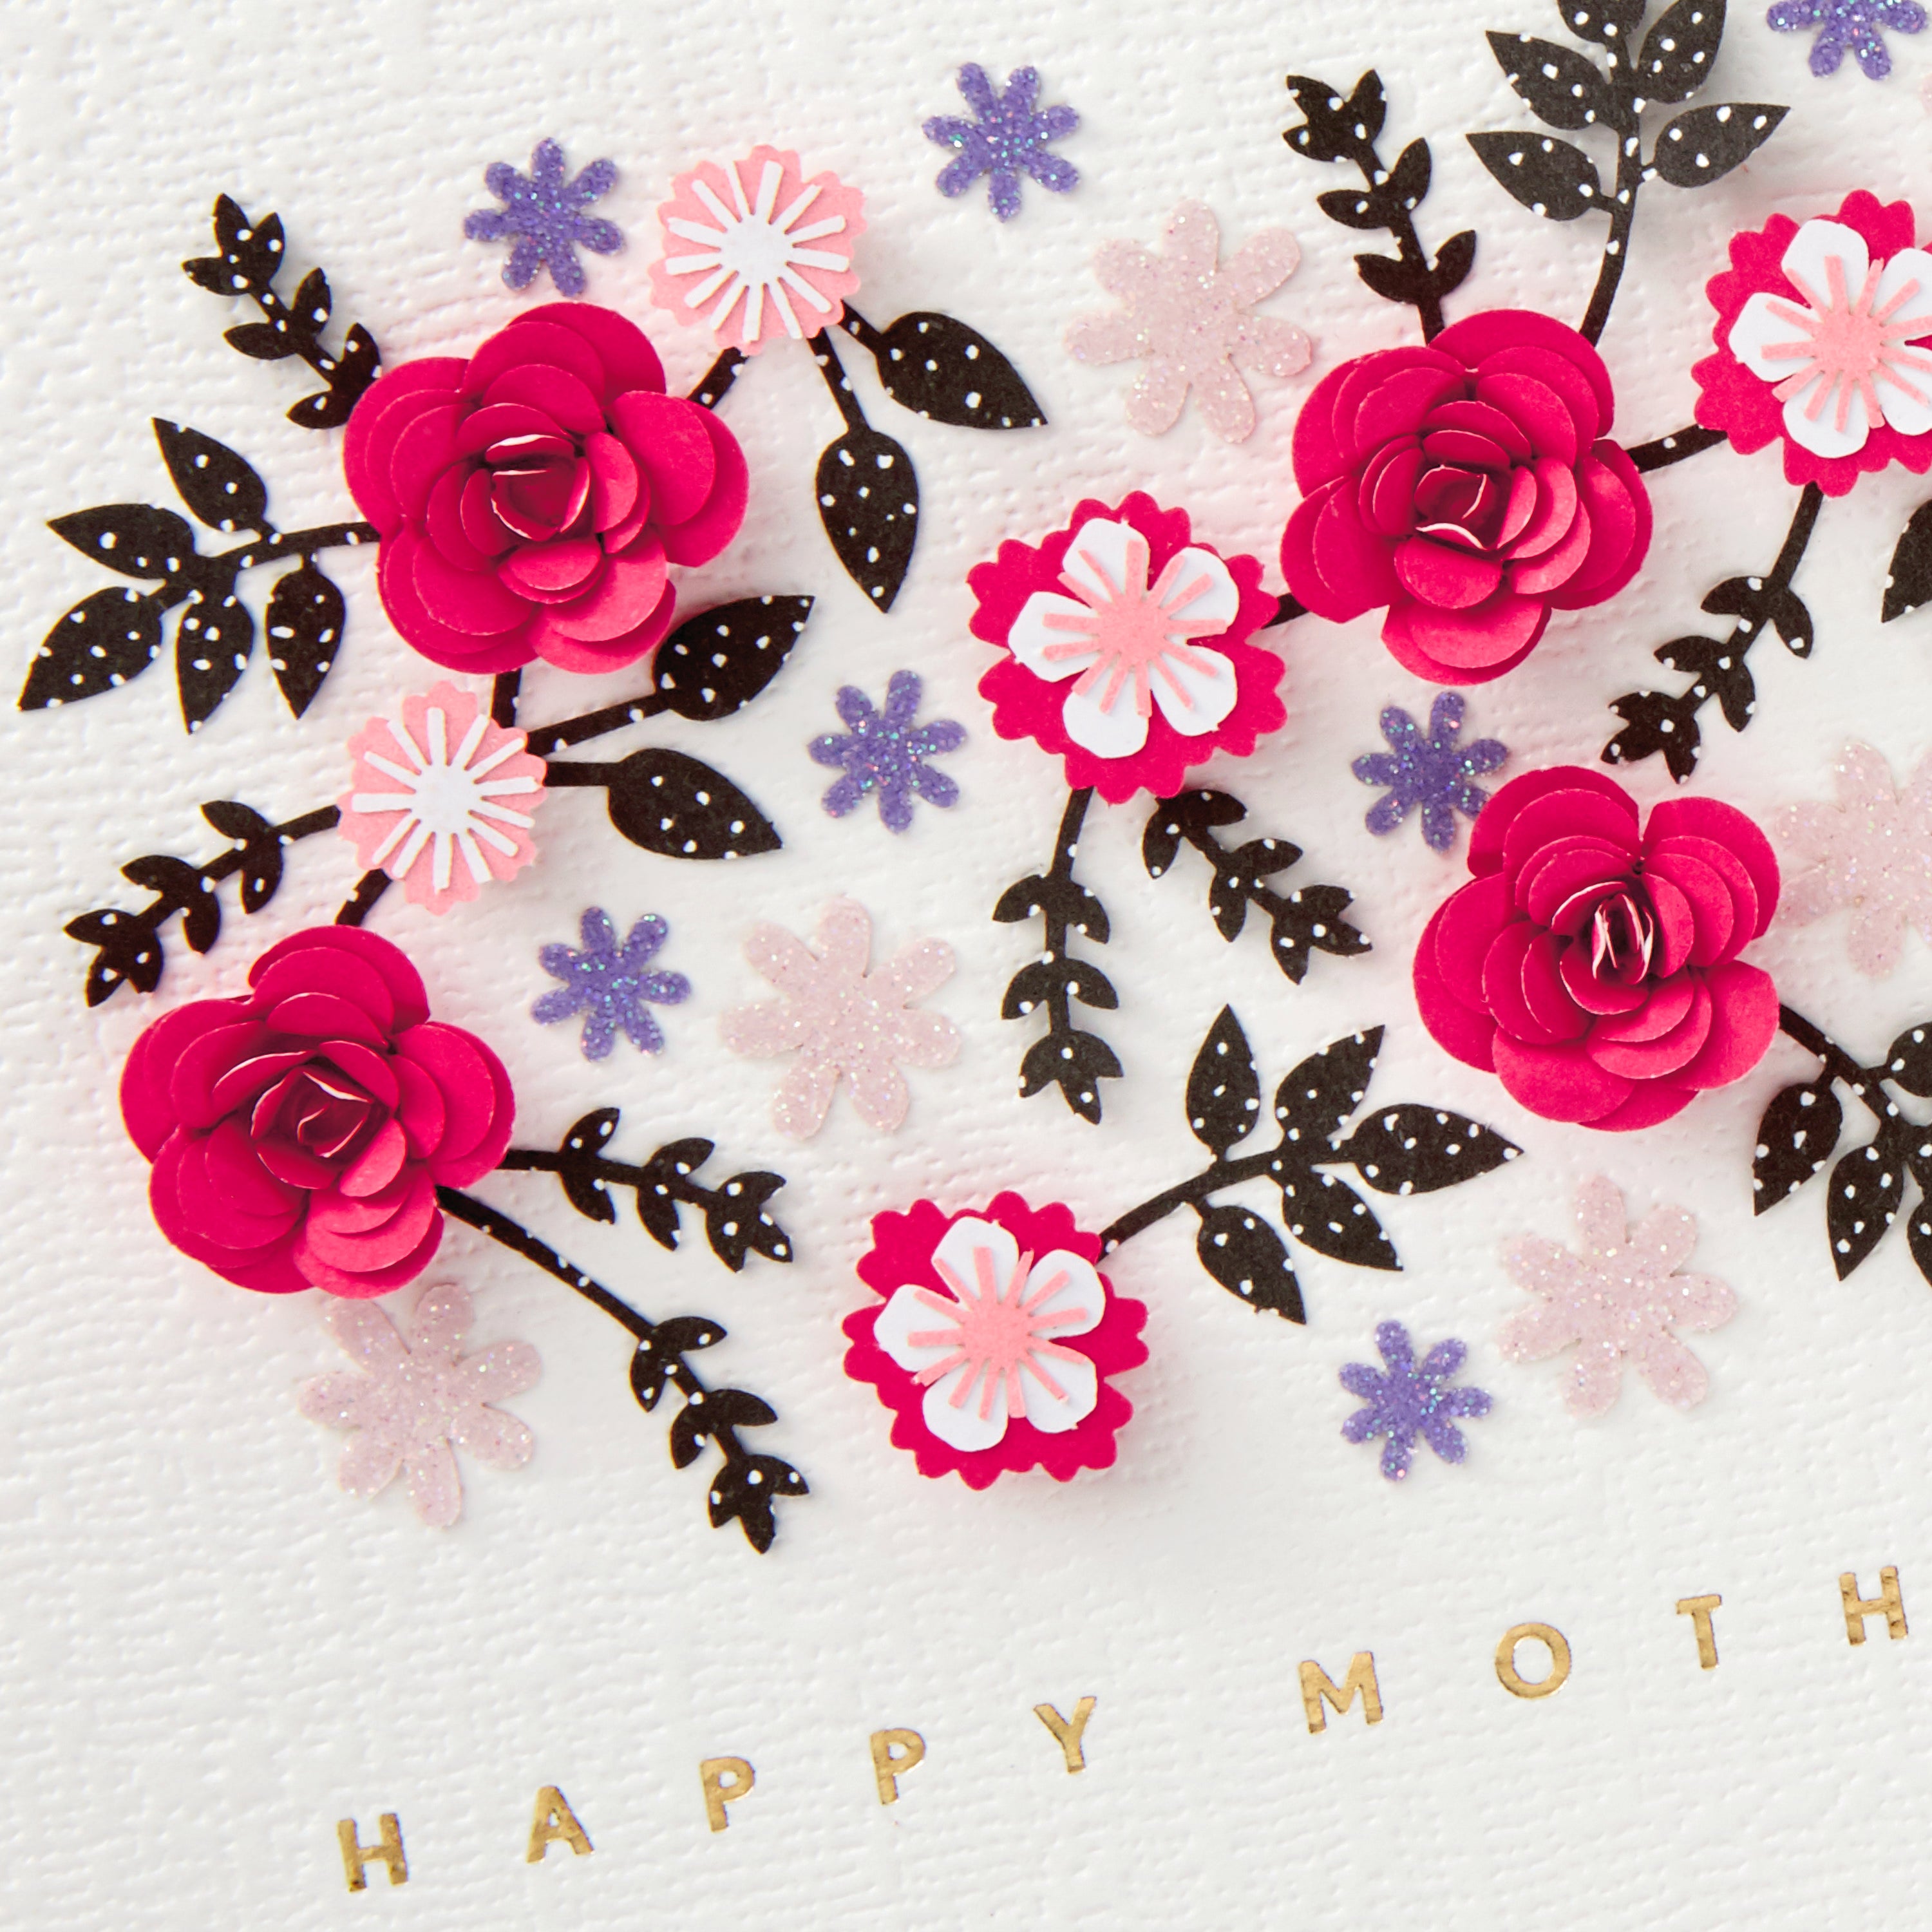 Signature Mother's Day Card (Cut Paper Flowers Have a Wonderful Day)